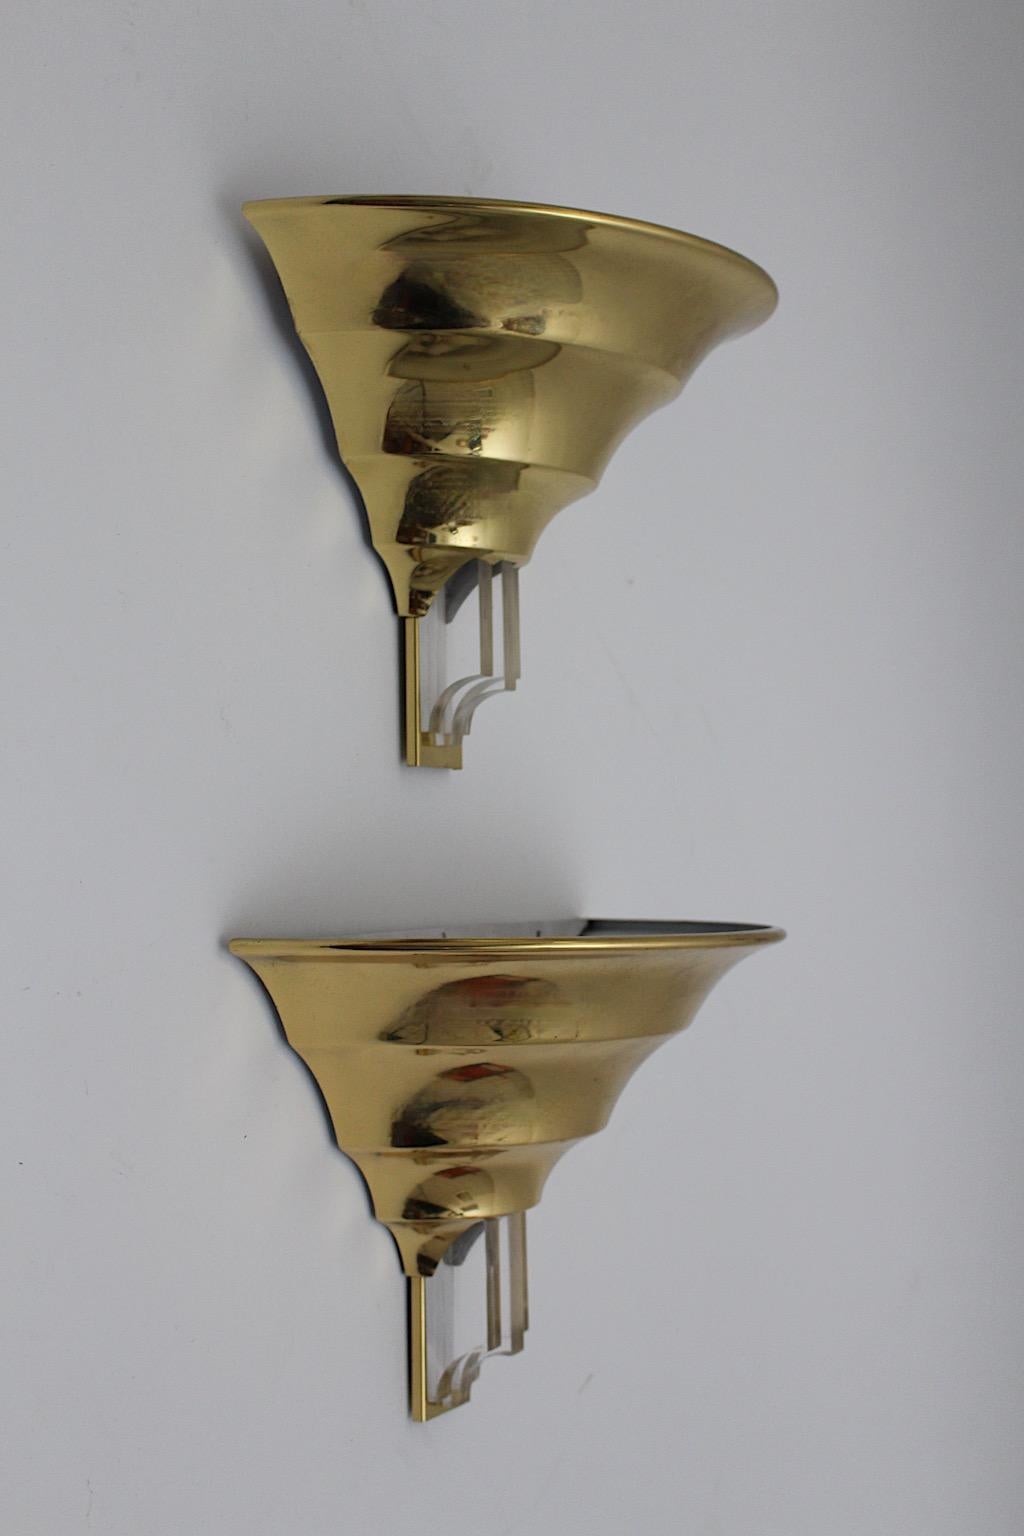 Italian Art Deco Style Vintage Brass Lucite Sconces Wall Lights Duo Pair 1980s Italy For Sale